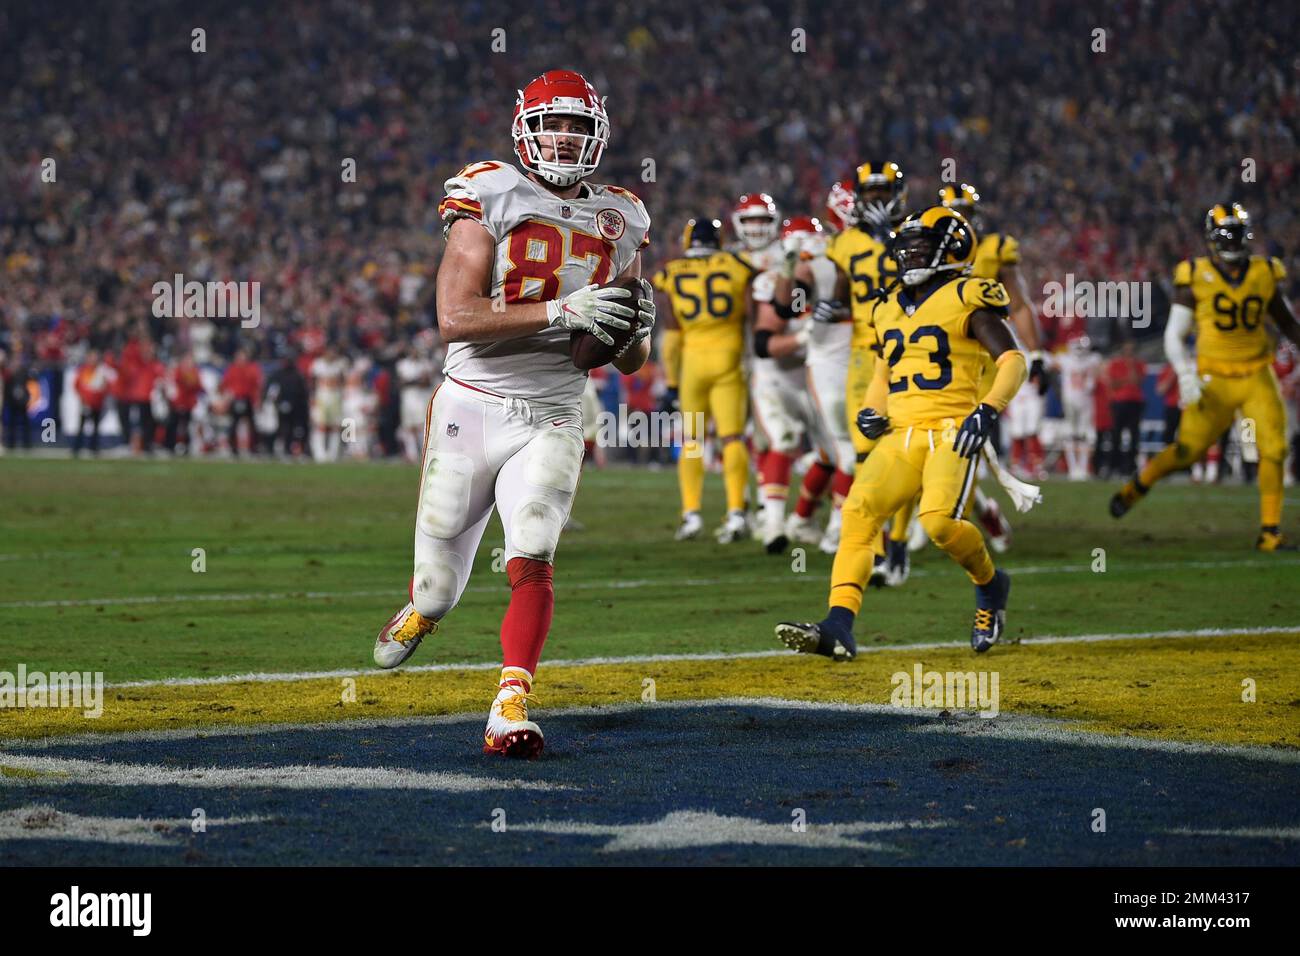 Kansas City Chiefs tight end Travis Kelce (87) scores a touchdown against the Los Angeles Rams during the second half of an NFL football game, Monday, Nov. 19, 2018, in Los Angeles. (AP Photo/Kelvin Kuo) Stock Photo